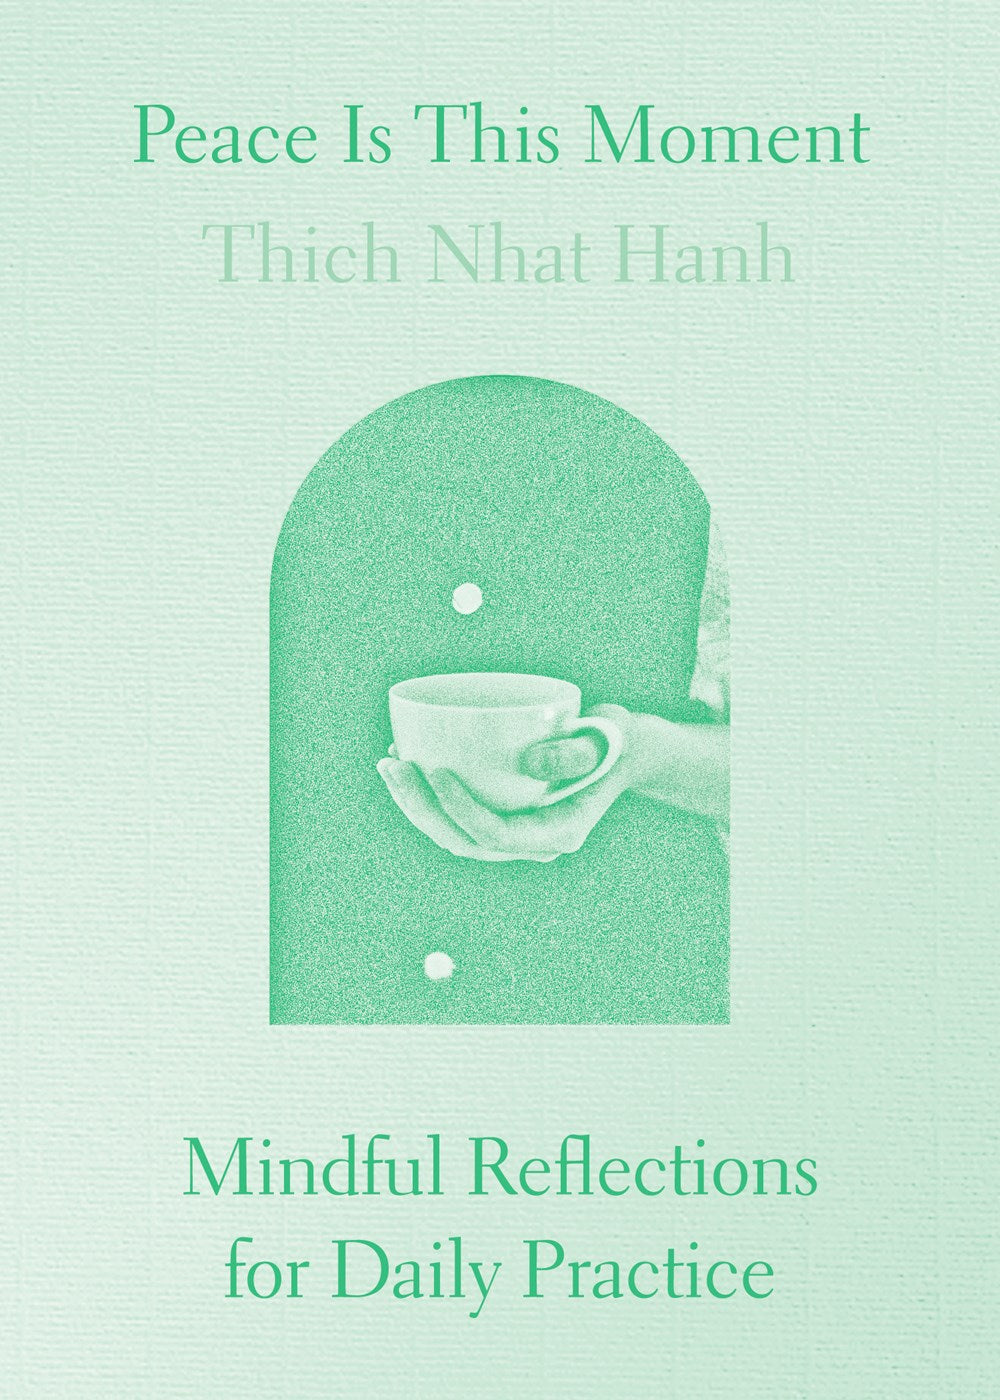 Peace Is This Moment: Mindful Reflections for Daily Practice